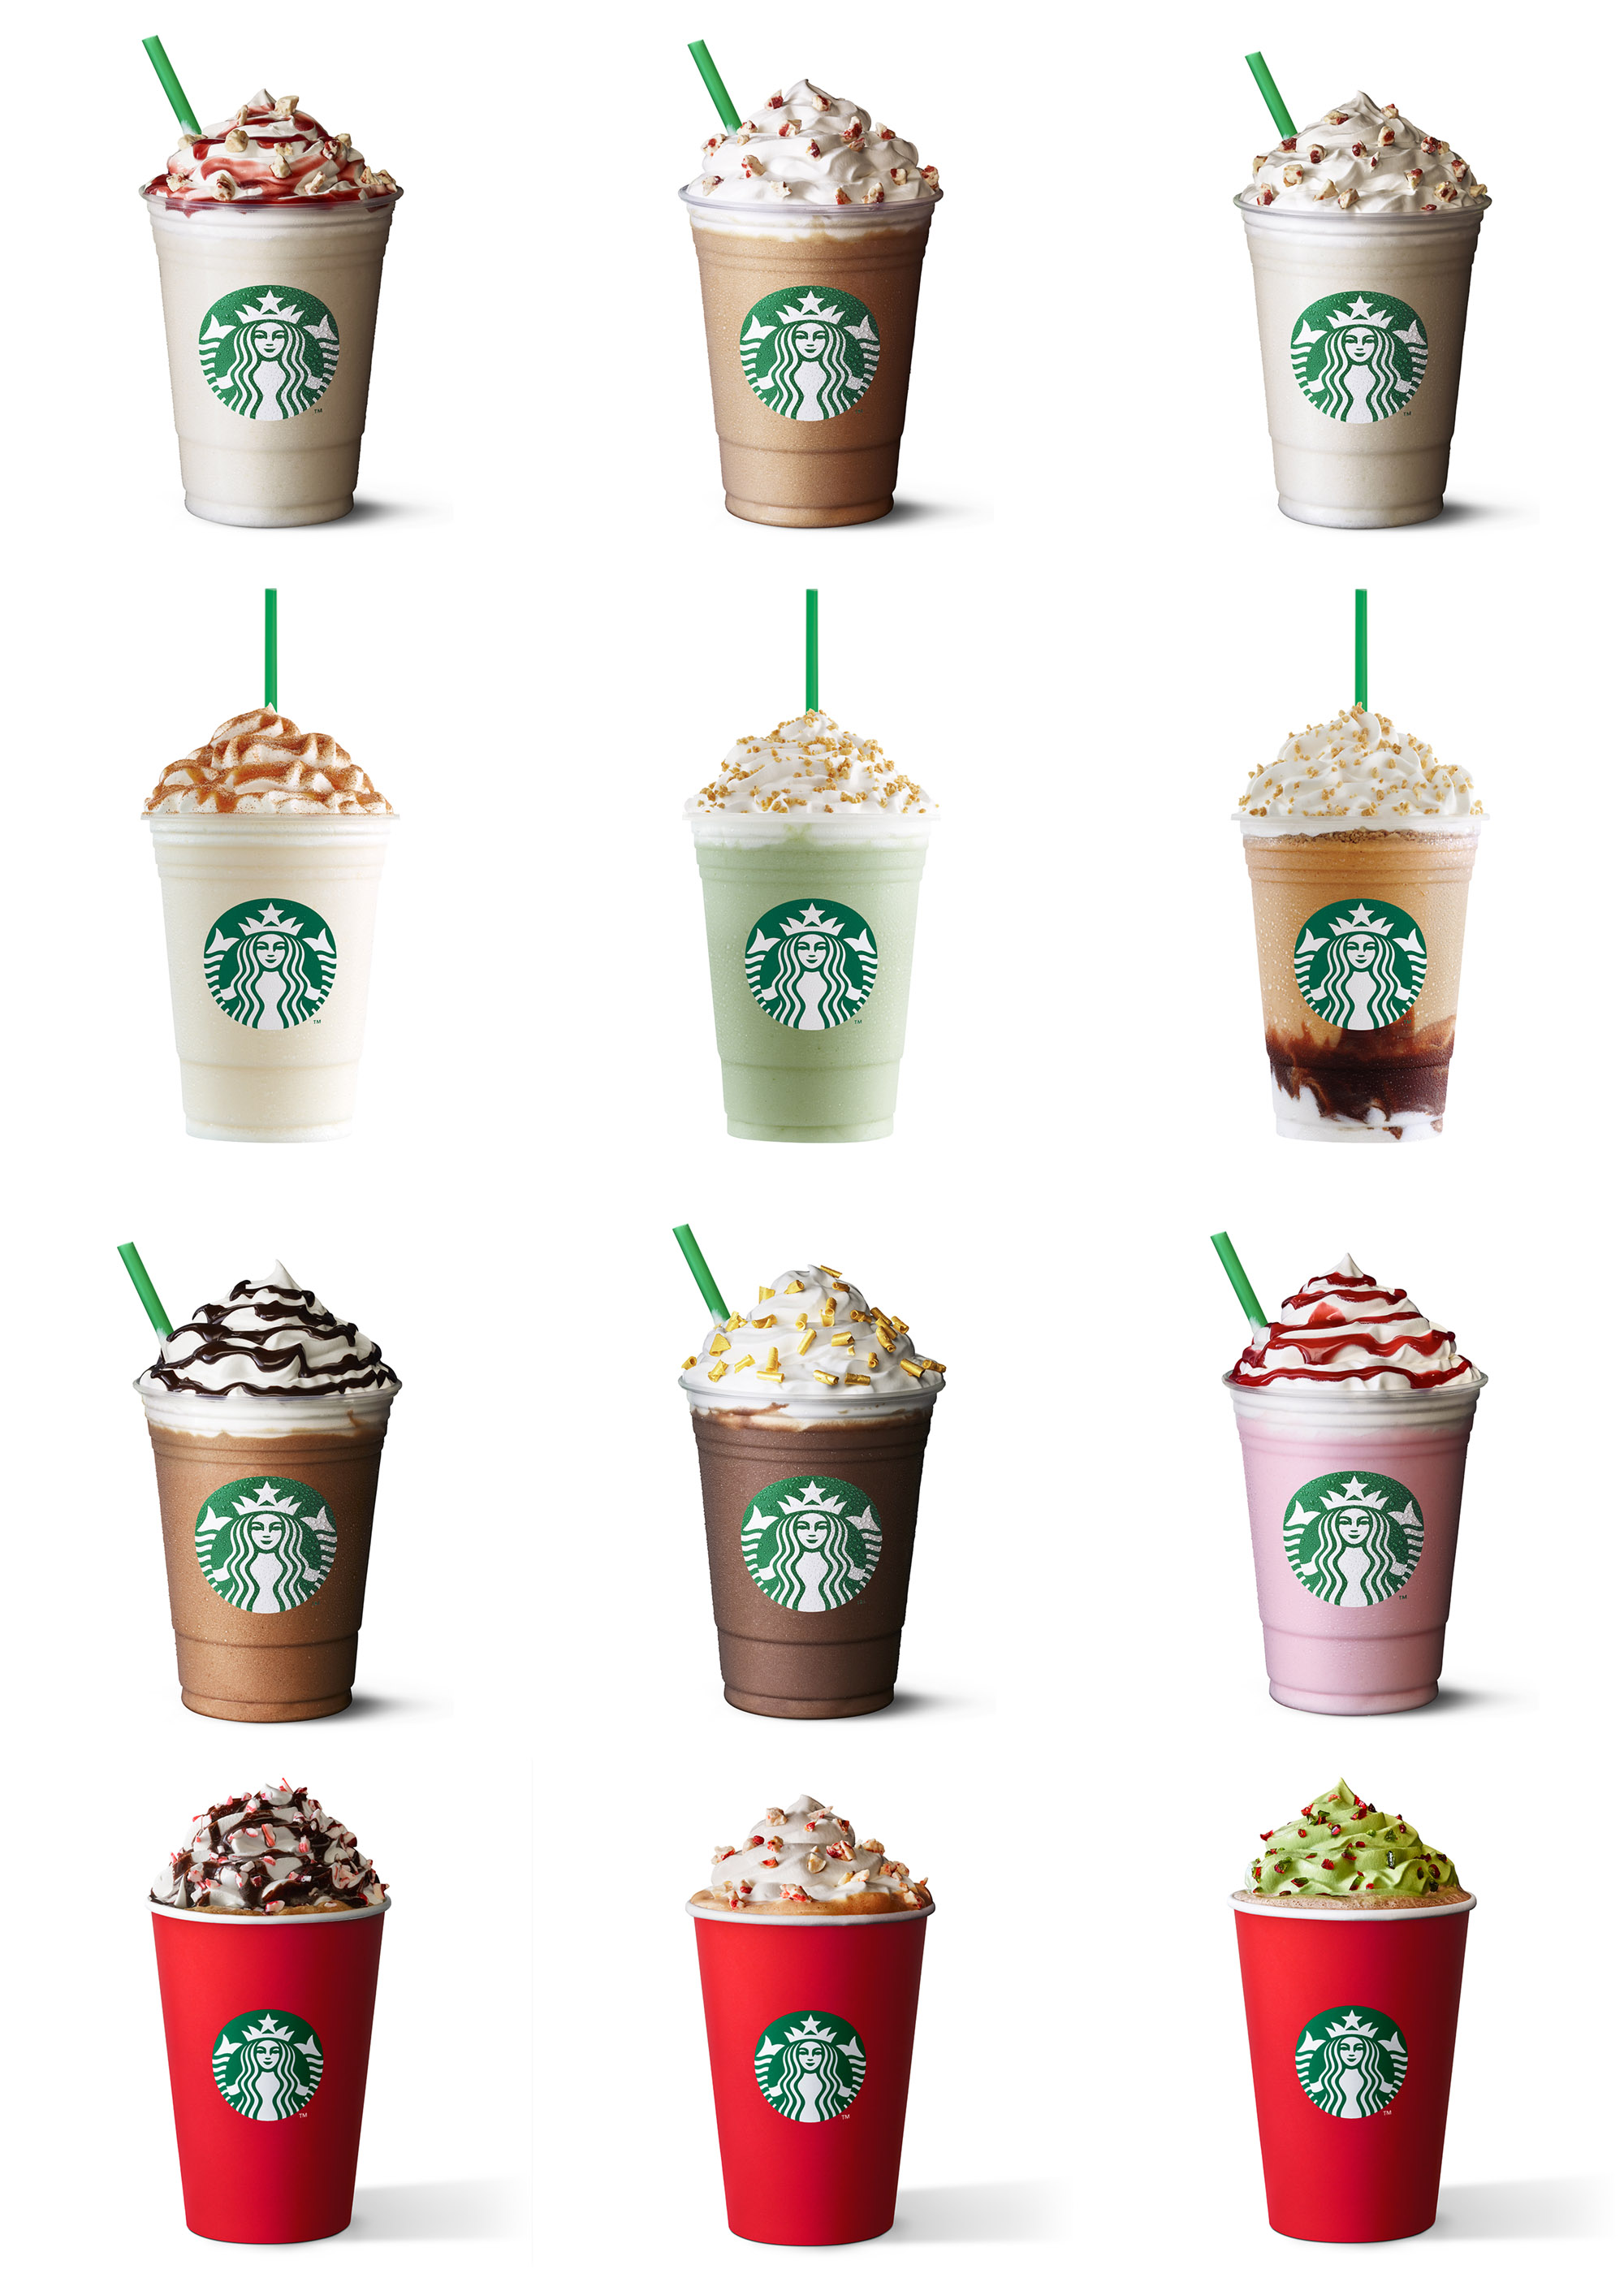 food stylist in Seattle - Frappucino varieties for the Holidays Starbucks menu boards advertising photographed by Annabelle Breakey photographer